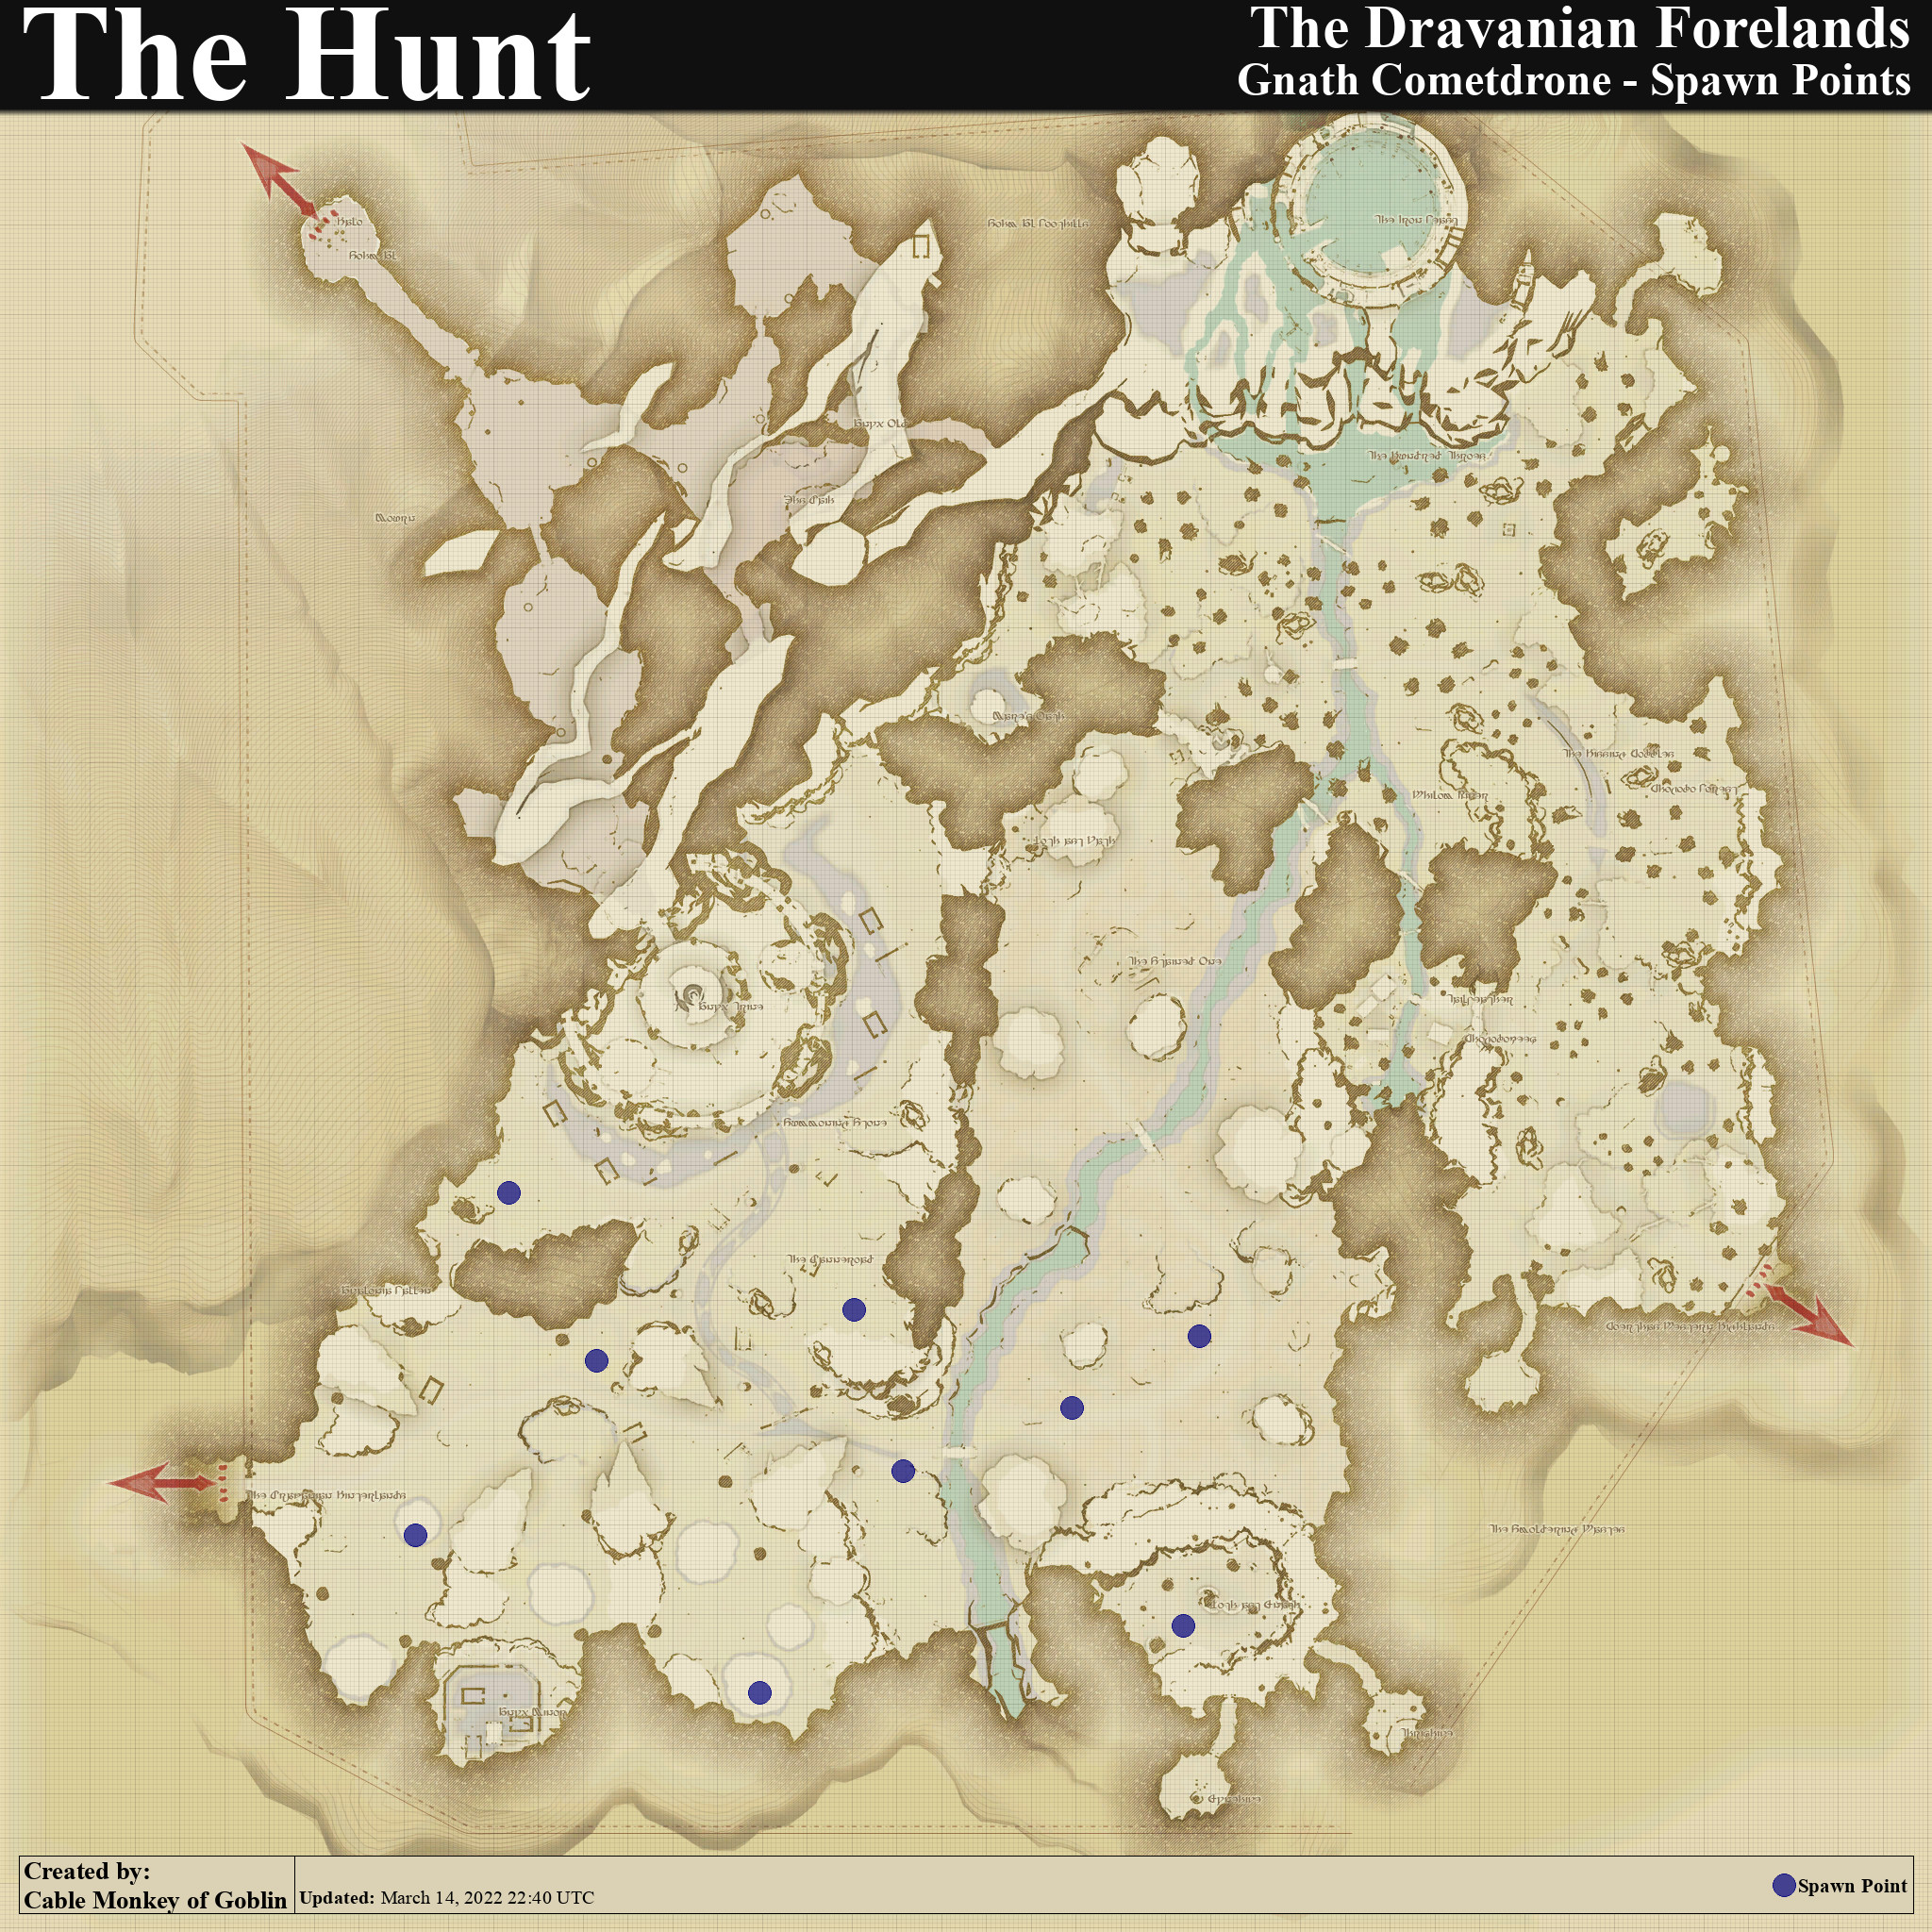 Cable Monkey's Hunt Maps